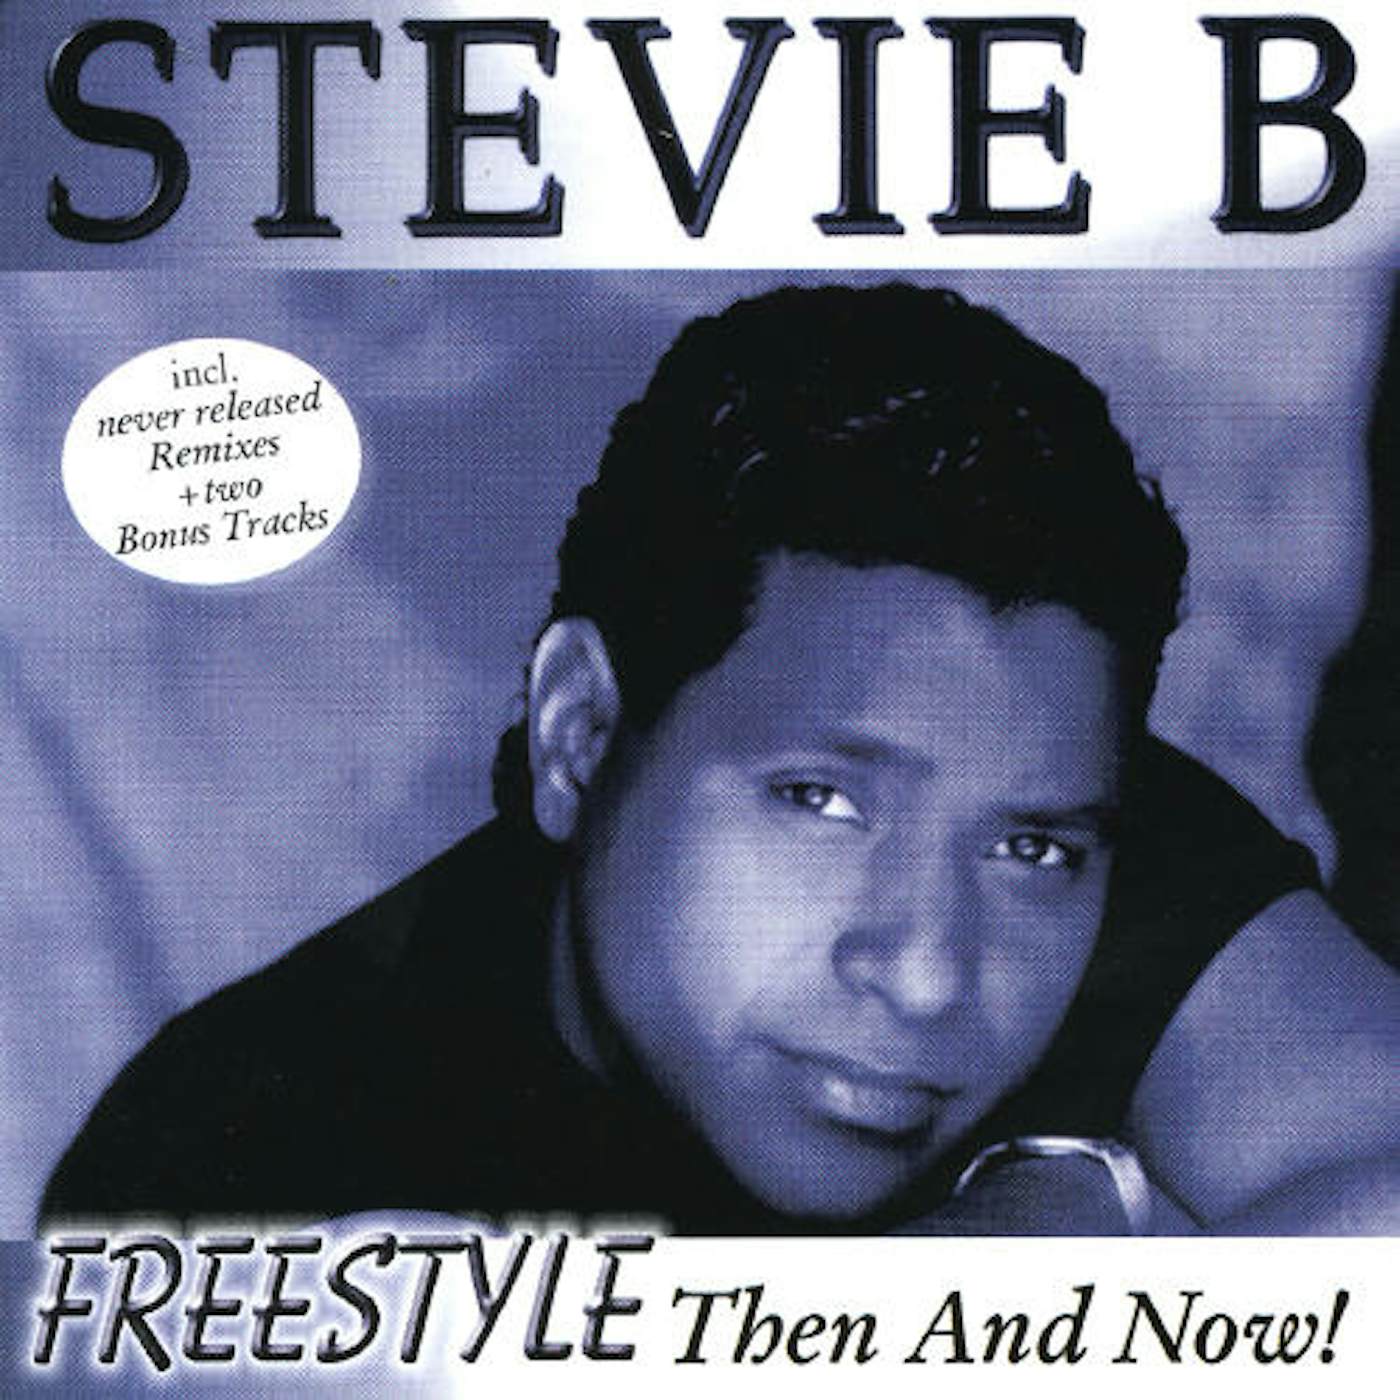 Stevie B FREESTYLE: THEN & NOW CD